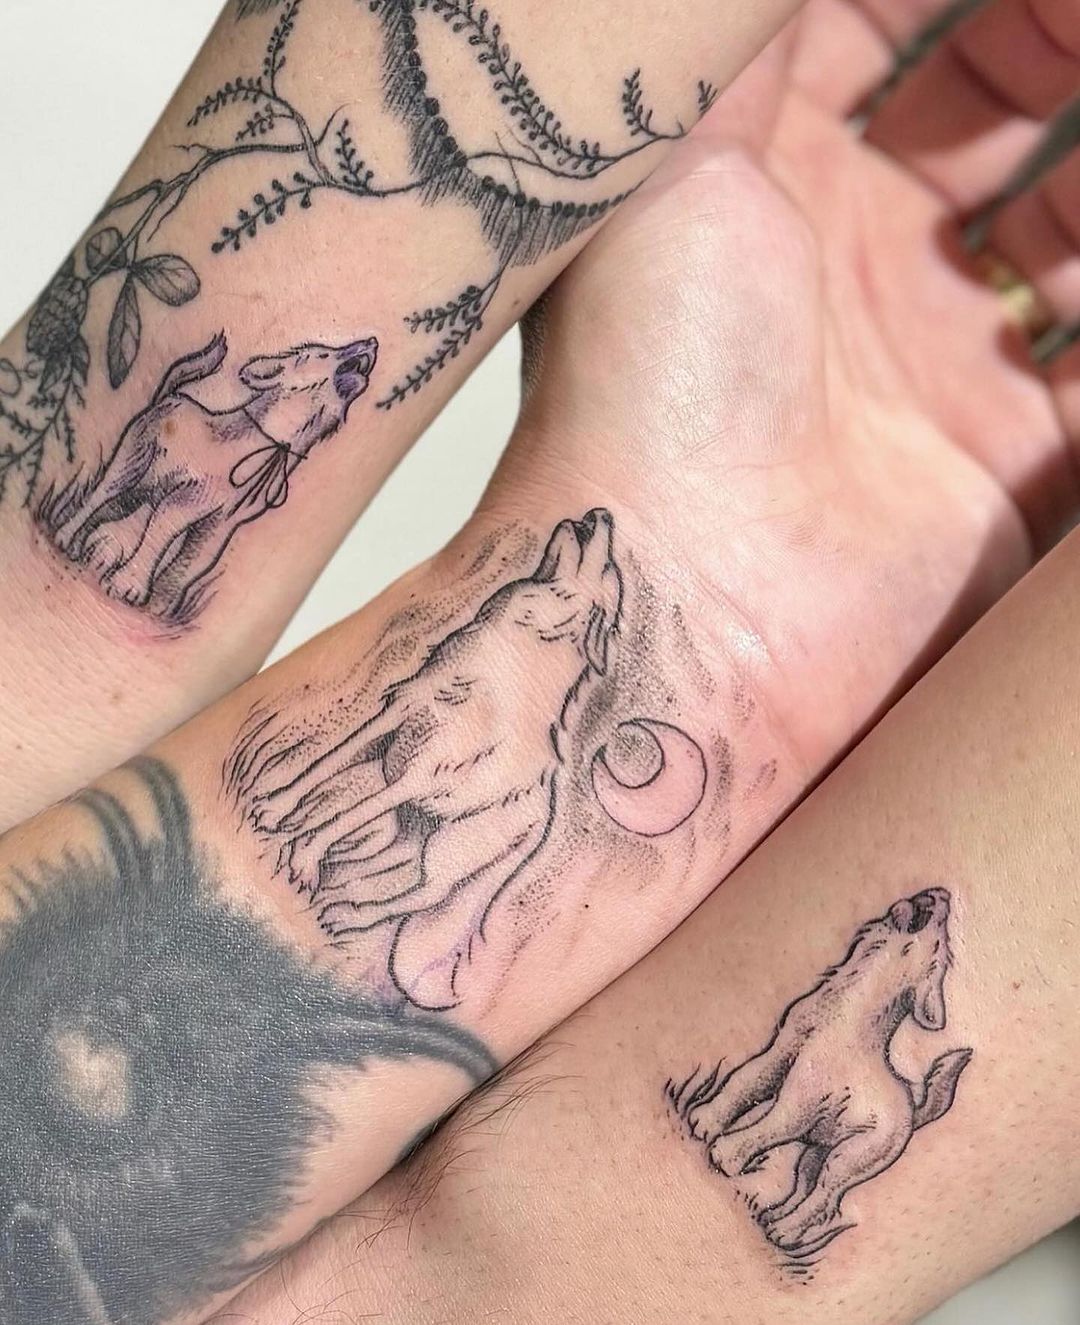 With her two children, Danielle got a mama wolf with two baby wolves